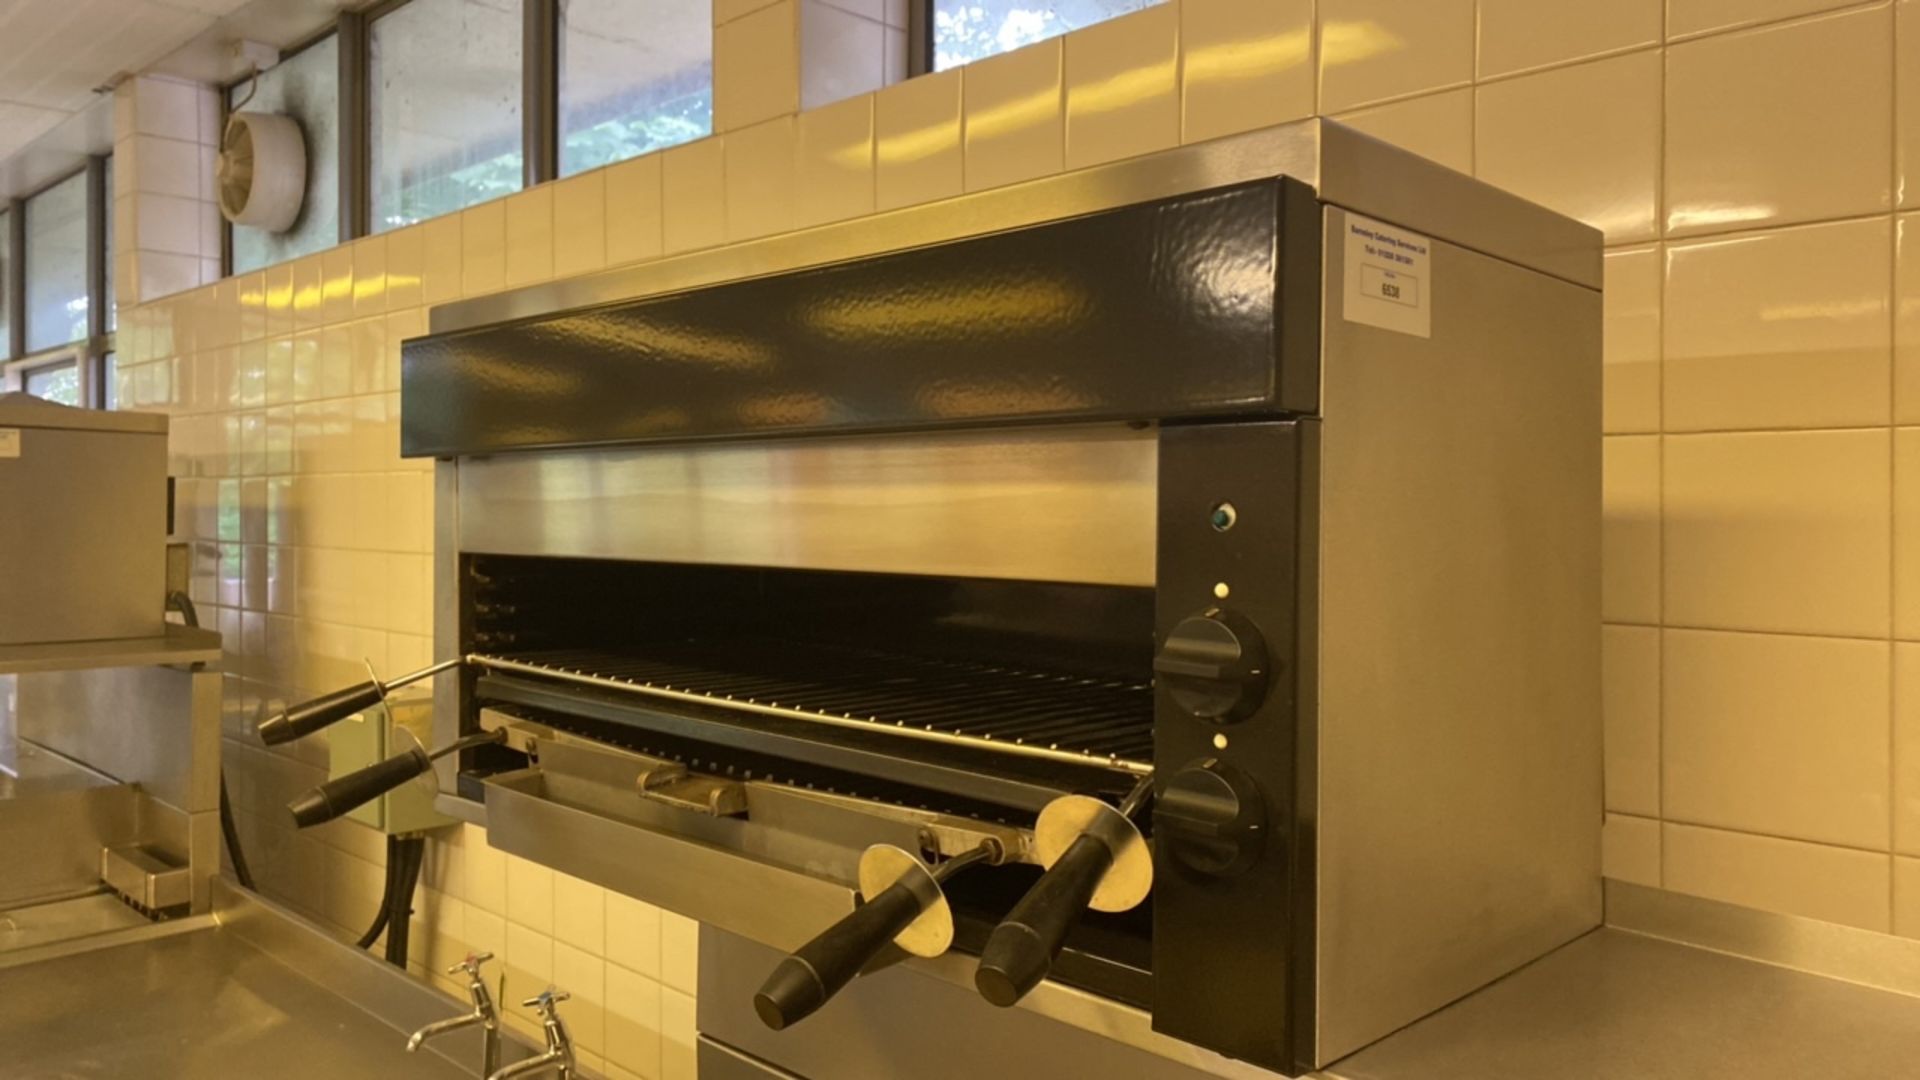 Morewood M Line Plus Grill - Image 3 of 4